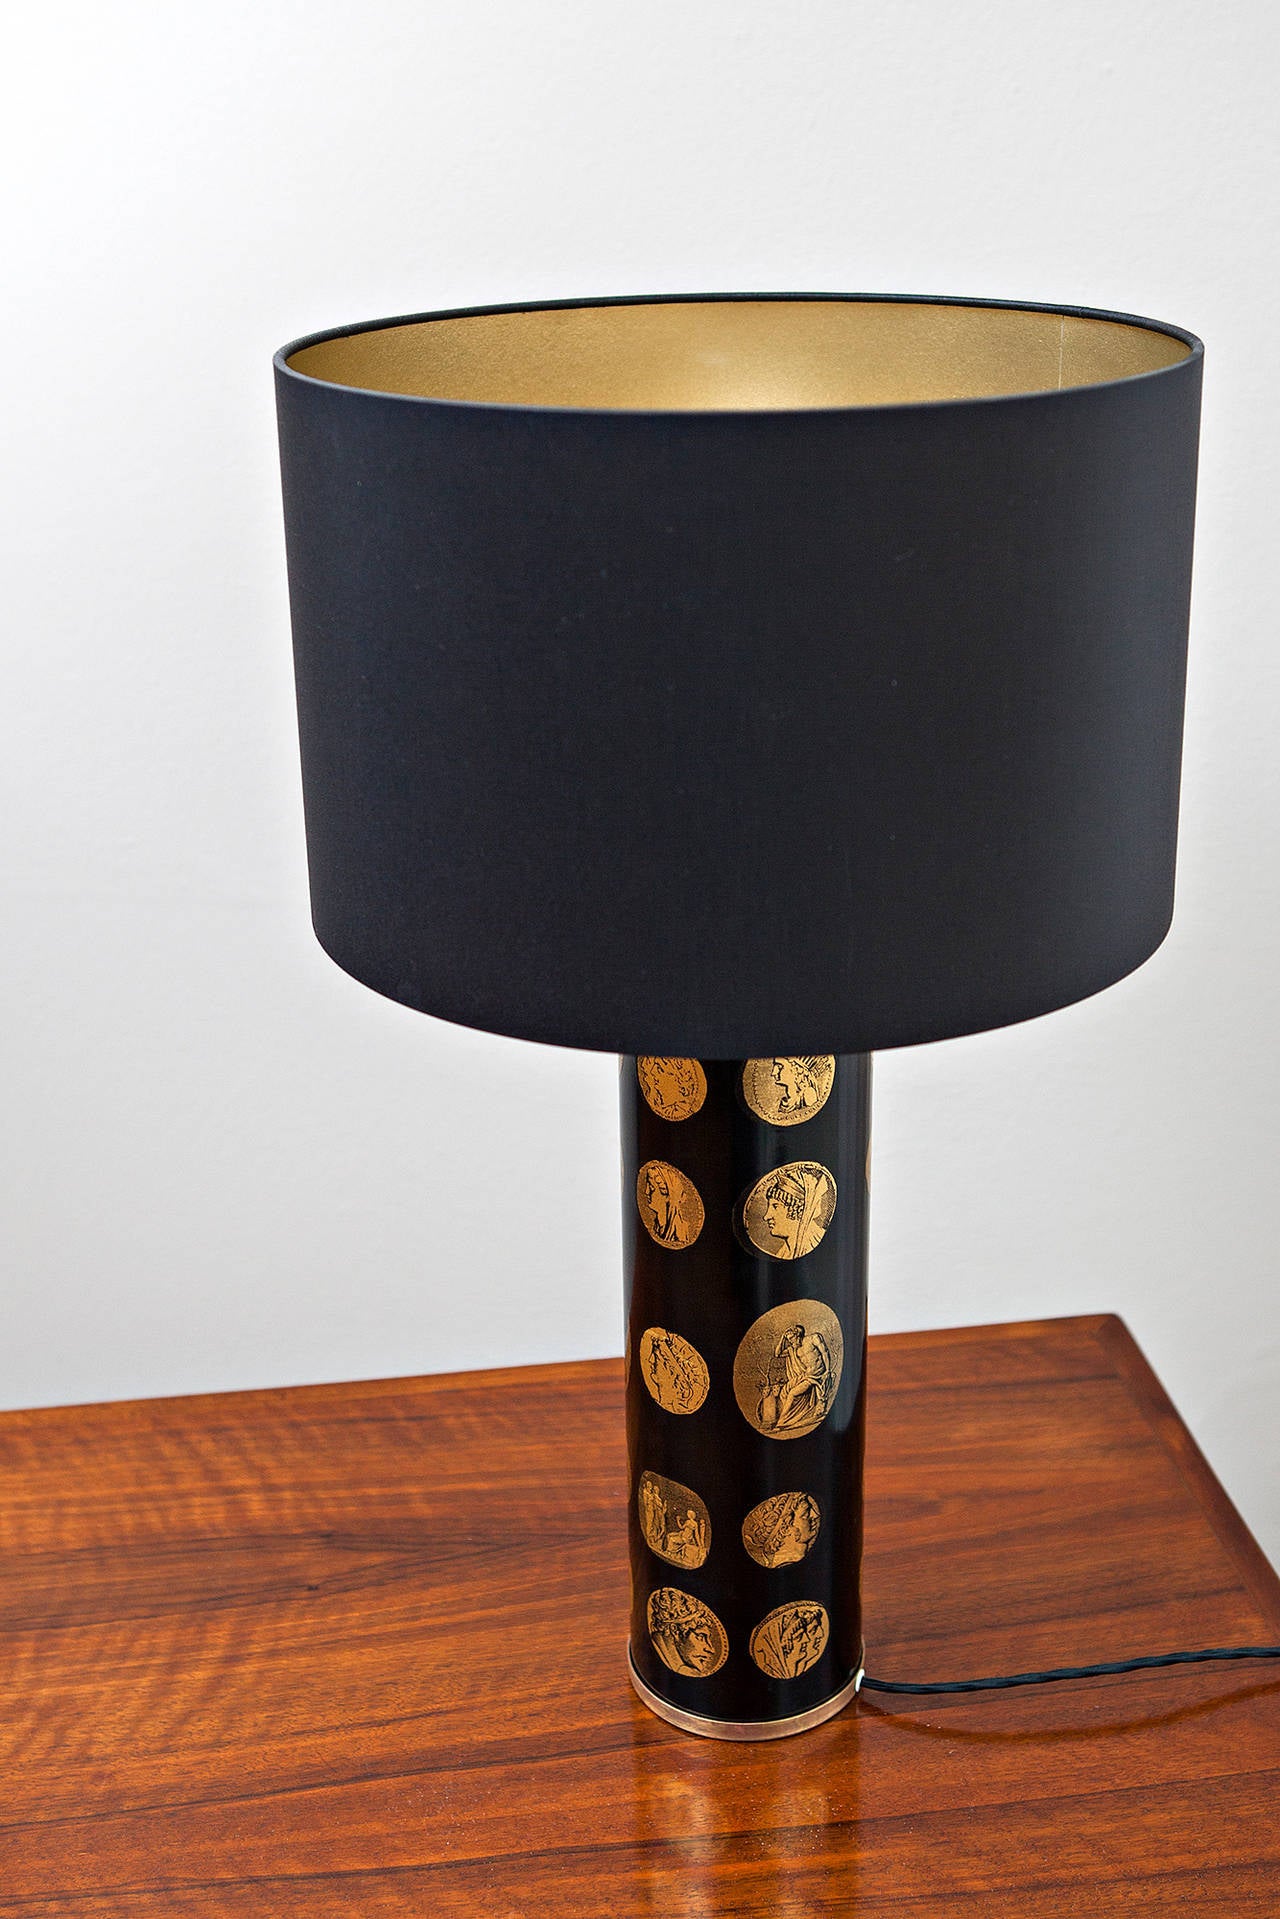 Piero Fornasetti (1913-1988), enameled table lamp in black with gold transfer printed lithographic cameos of emperors with brass details, signed with label on the base.
New black silk shade with inside gold: diameter 33 cm, lamp with shade is 58 cm